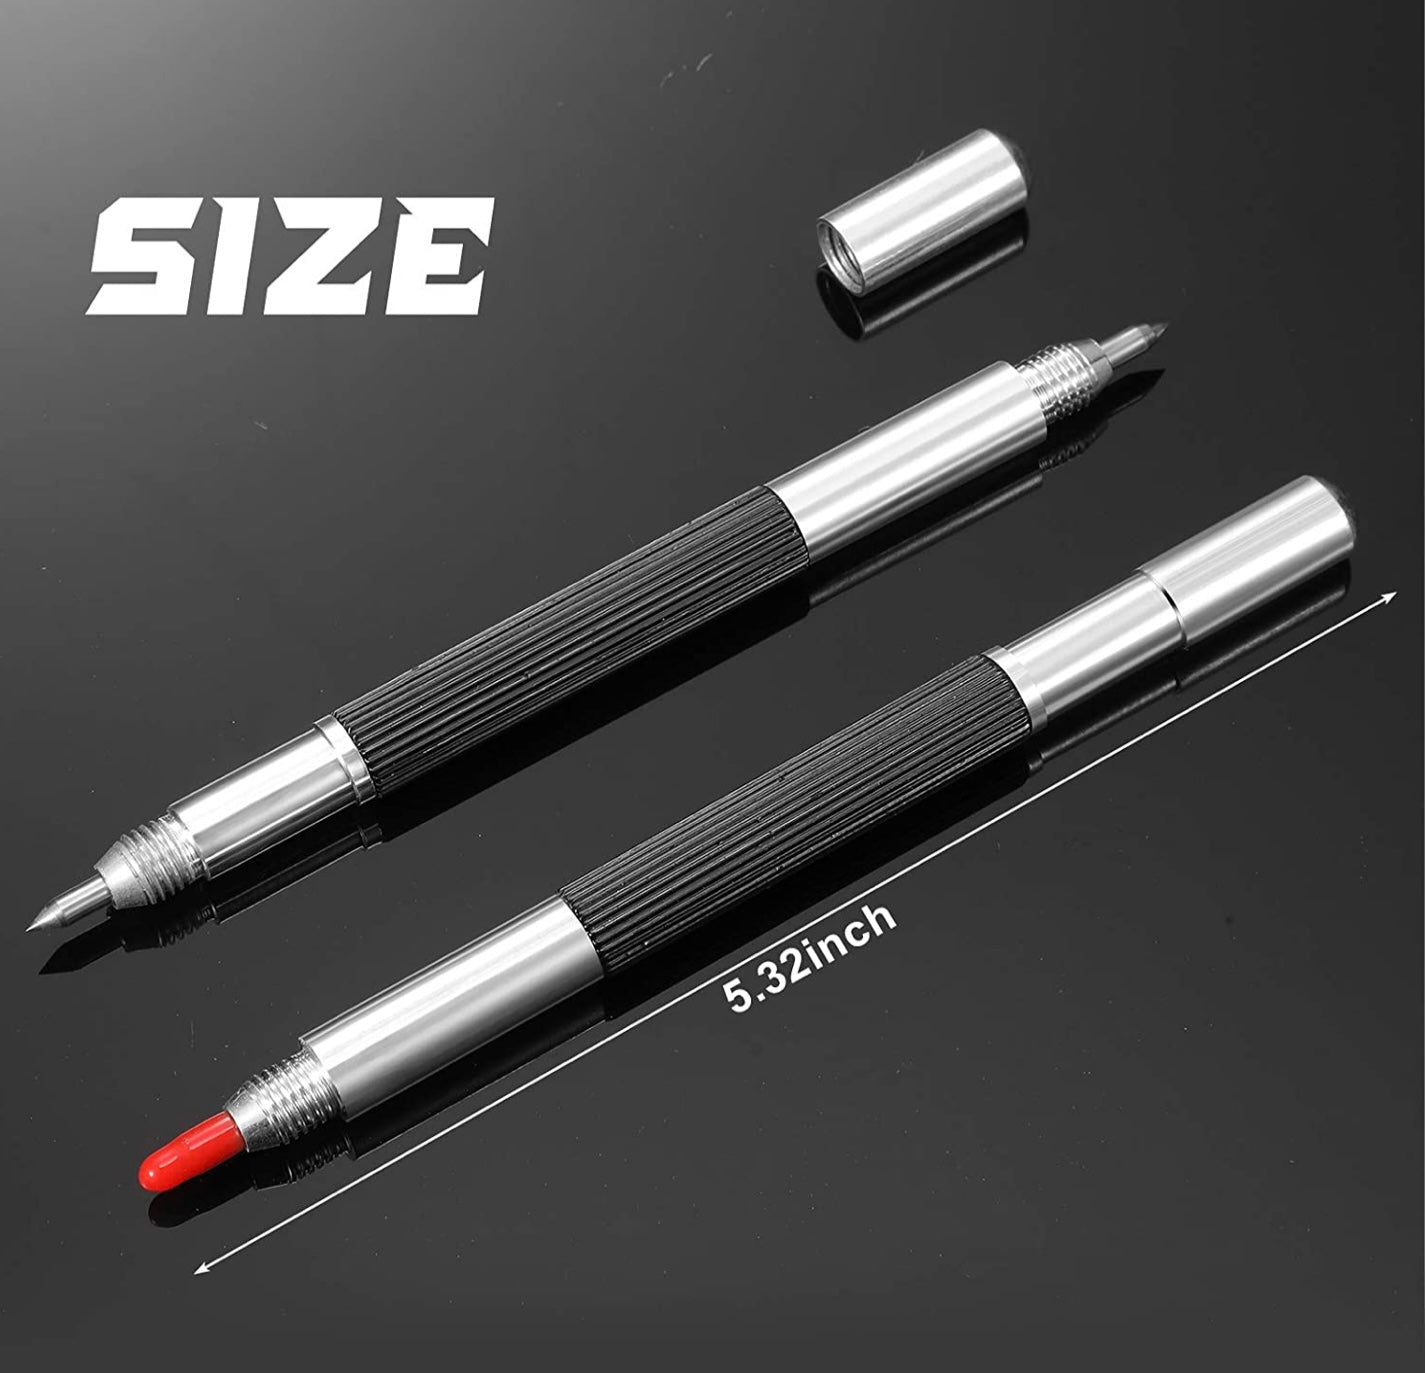 Double Ended Etching Pen Scribe Engraving Tool